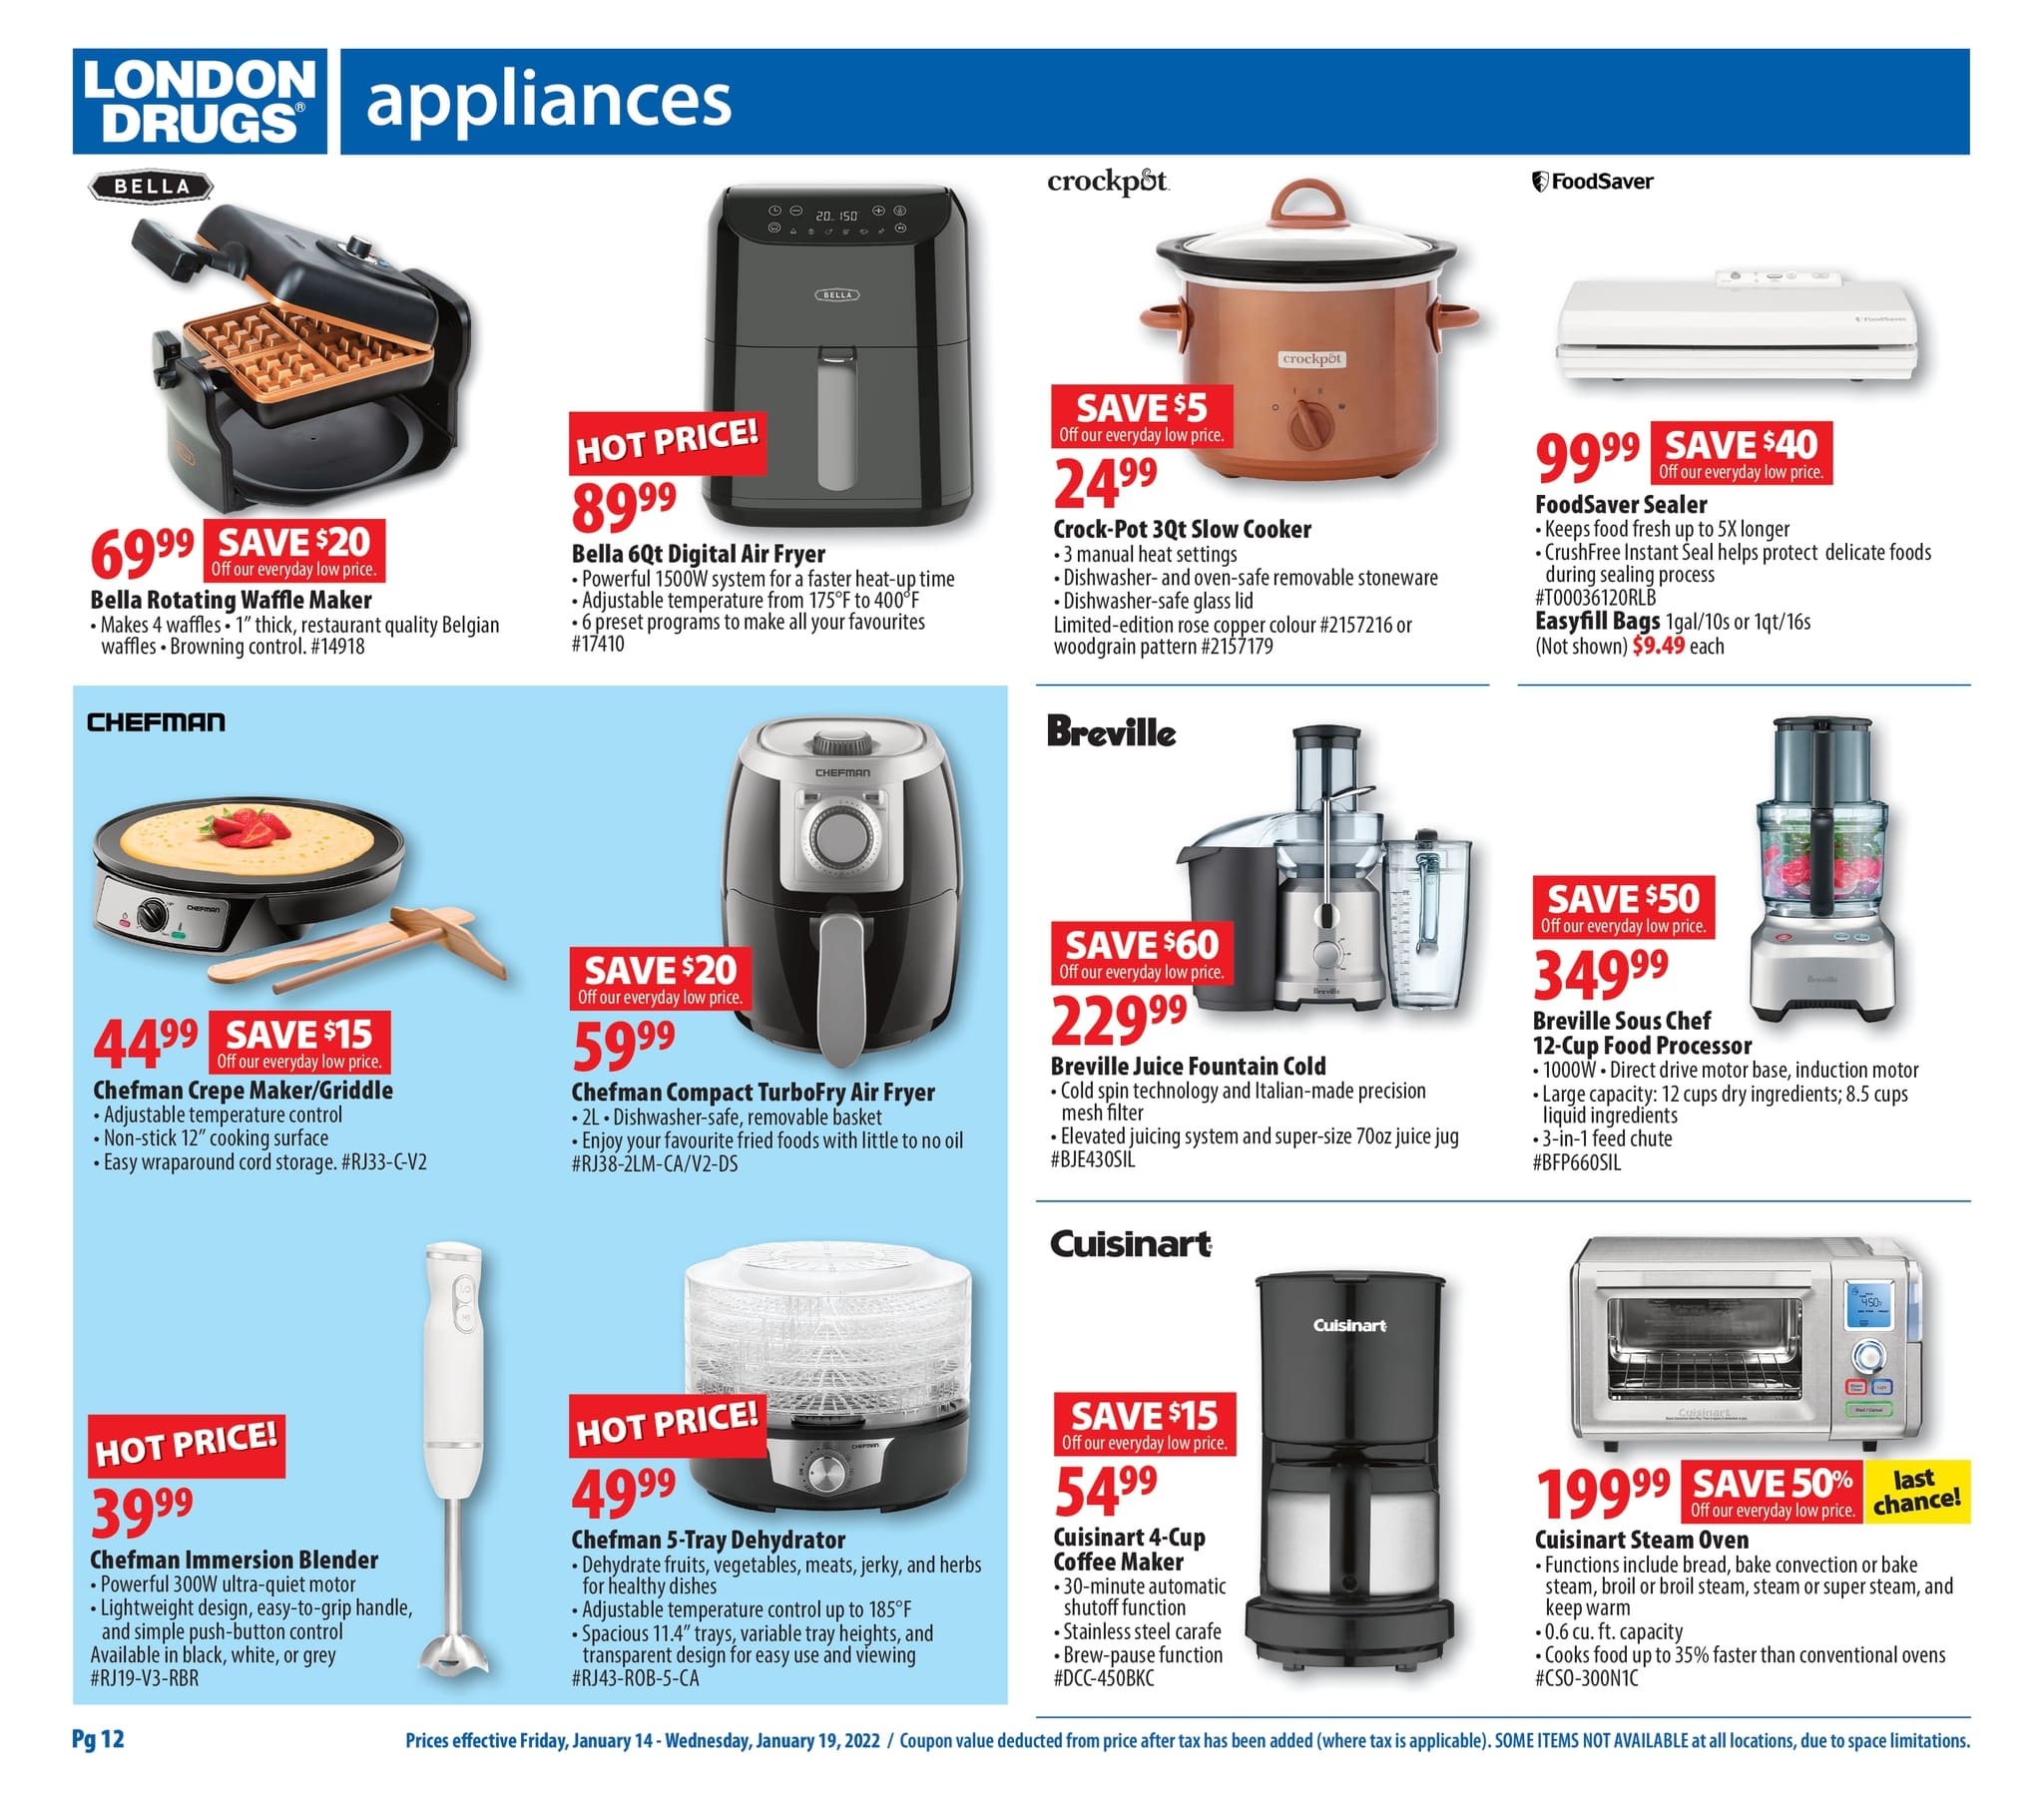 London Drugs - Weekly Flyer Specials - Page 12